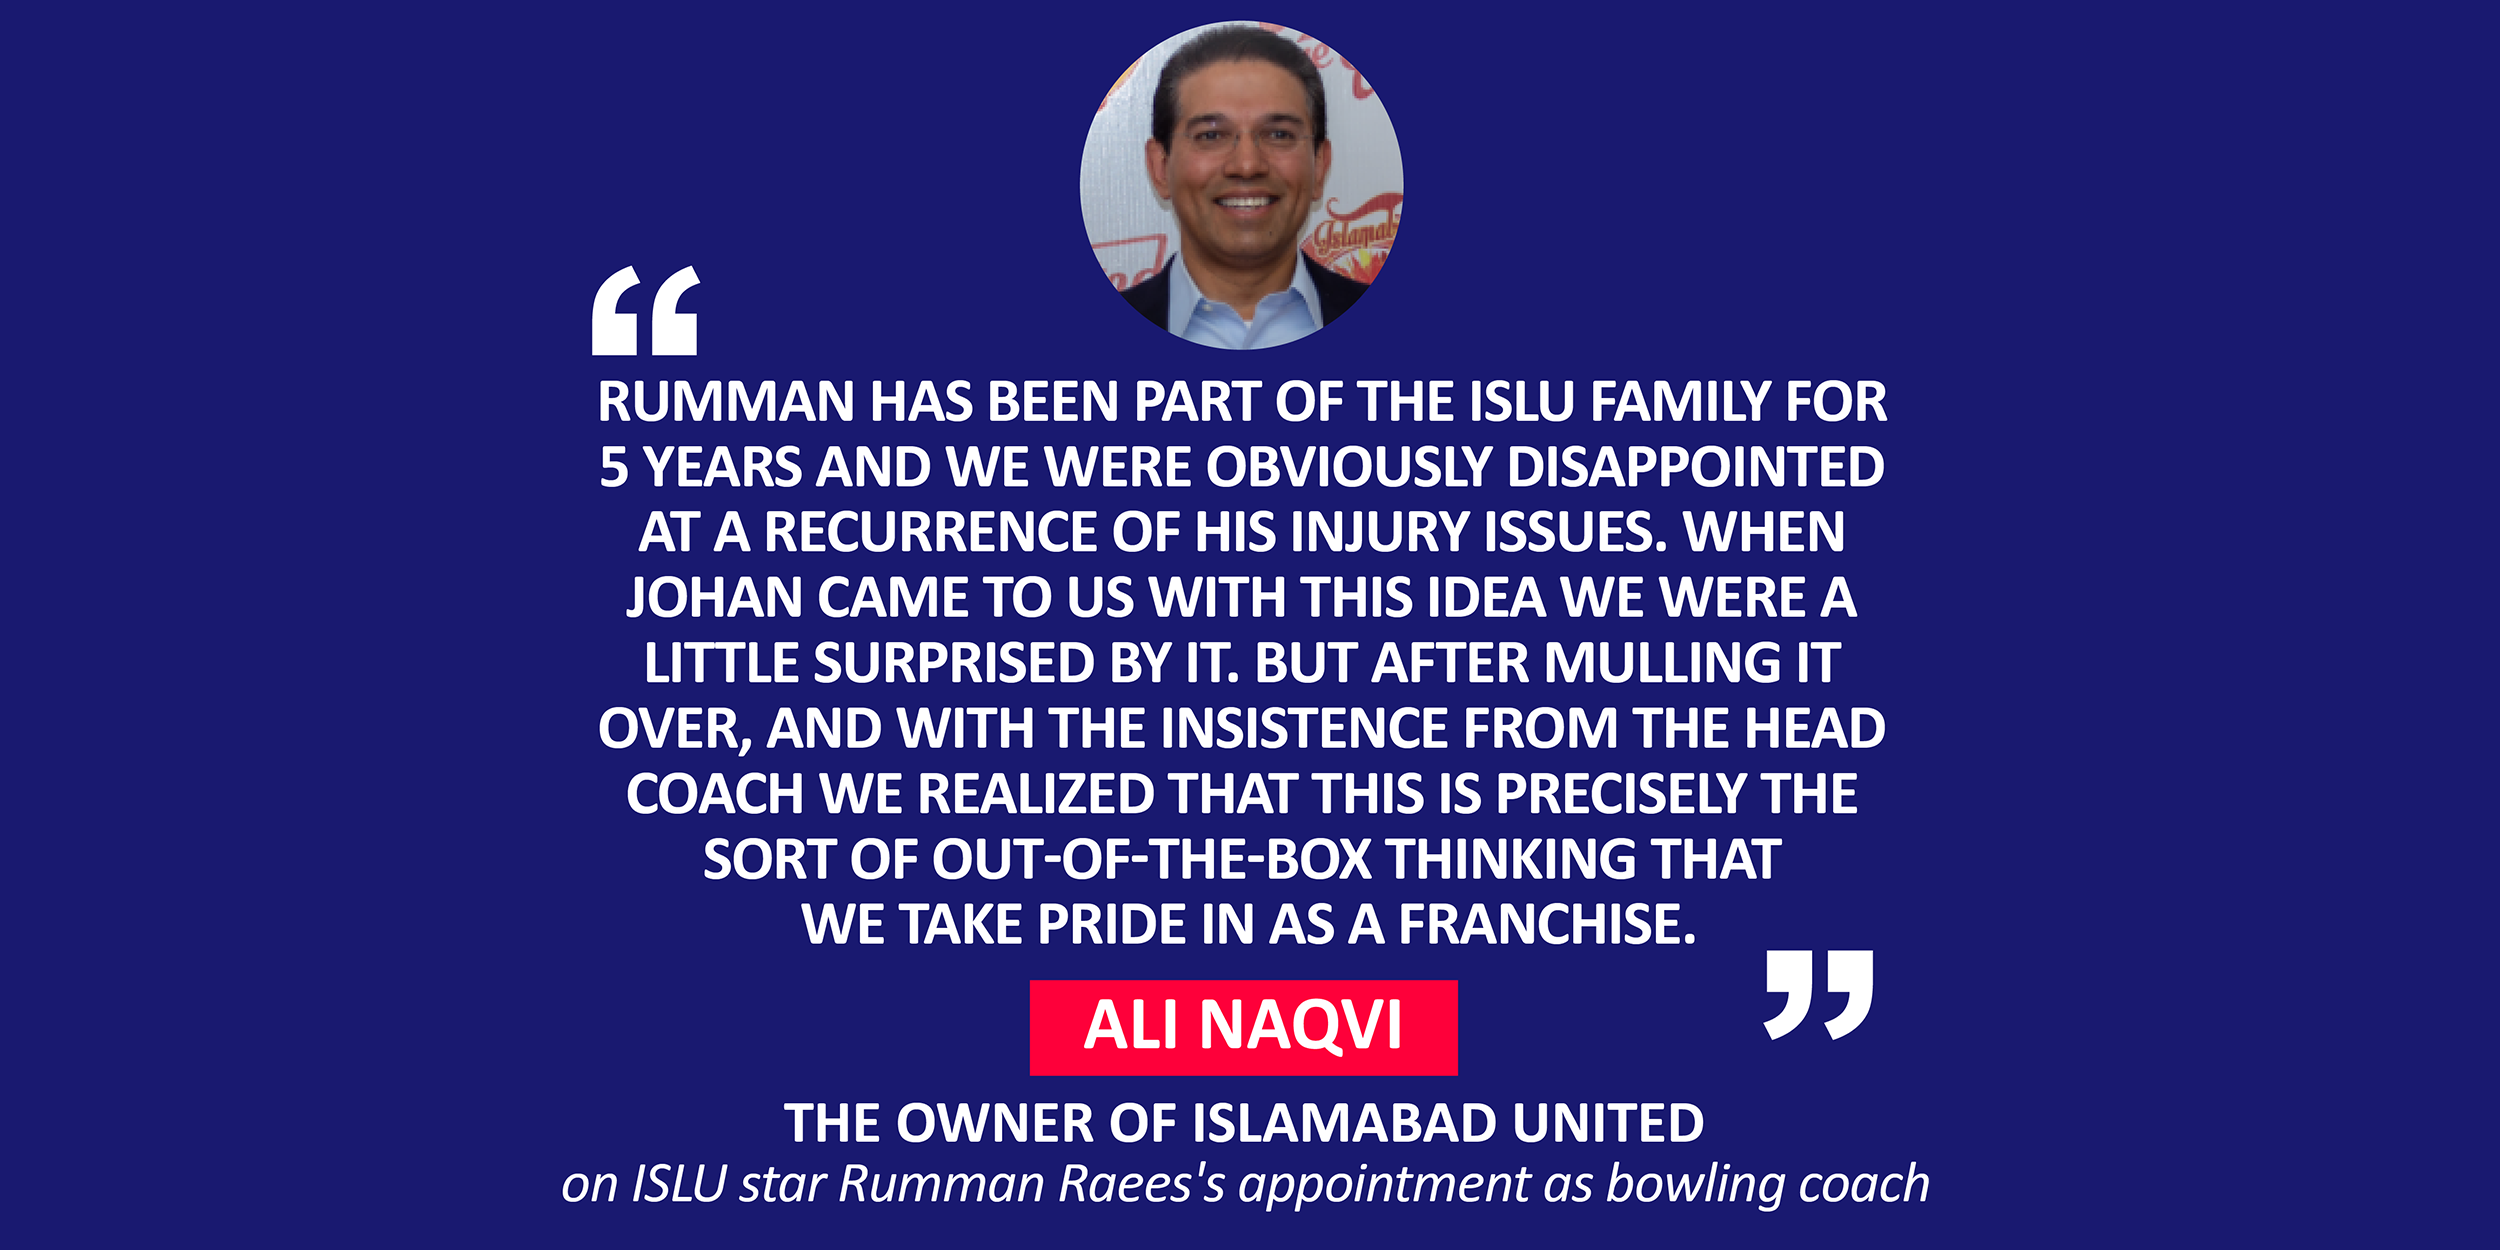 Ali Naqvi, the Owner of Islamabad United on ISLU star Rumman Raees's appointment as bowling coach